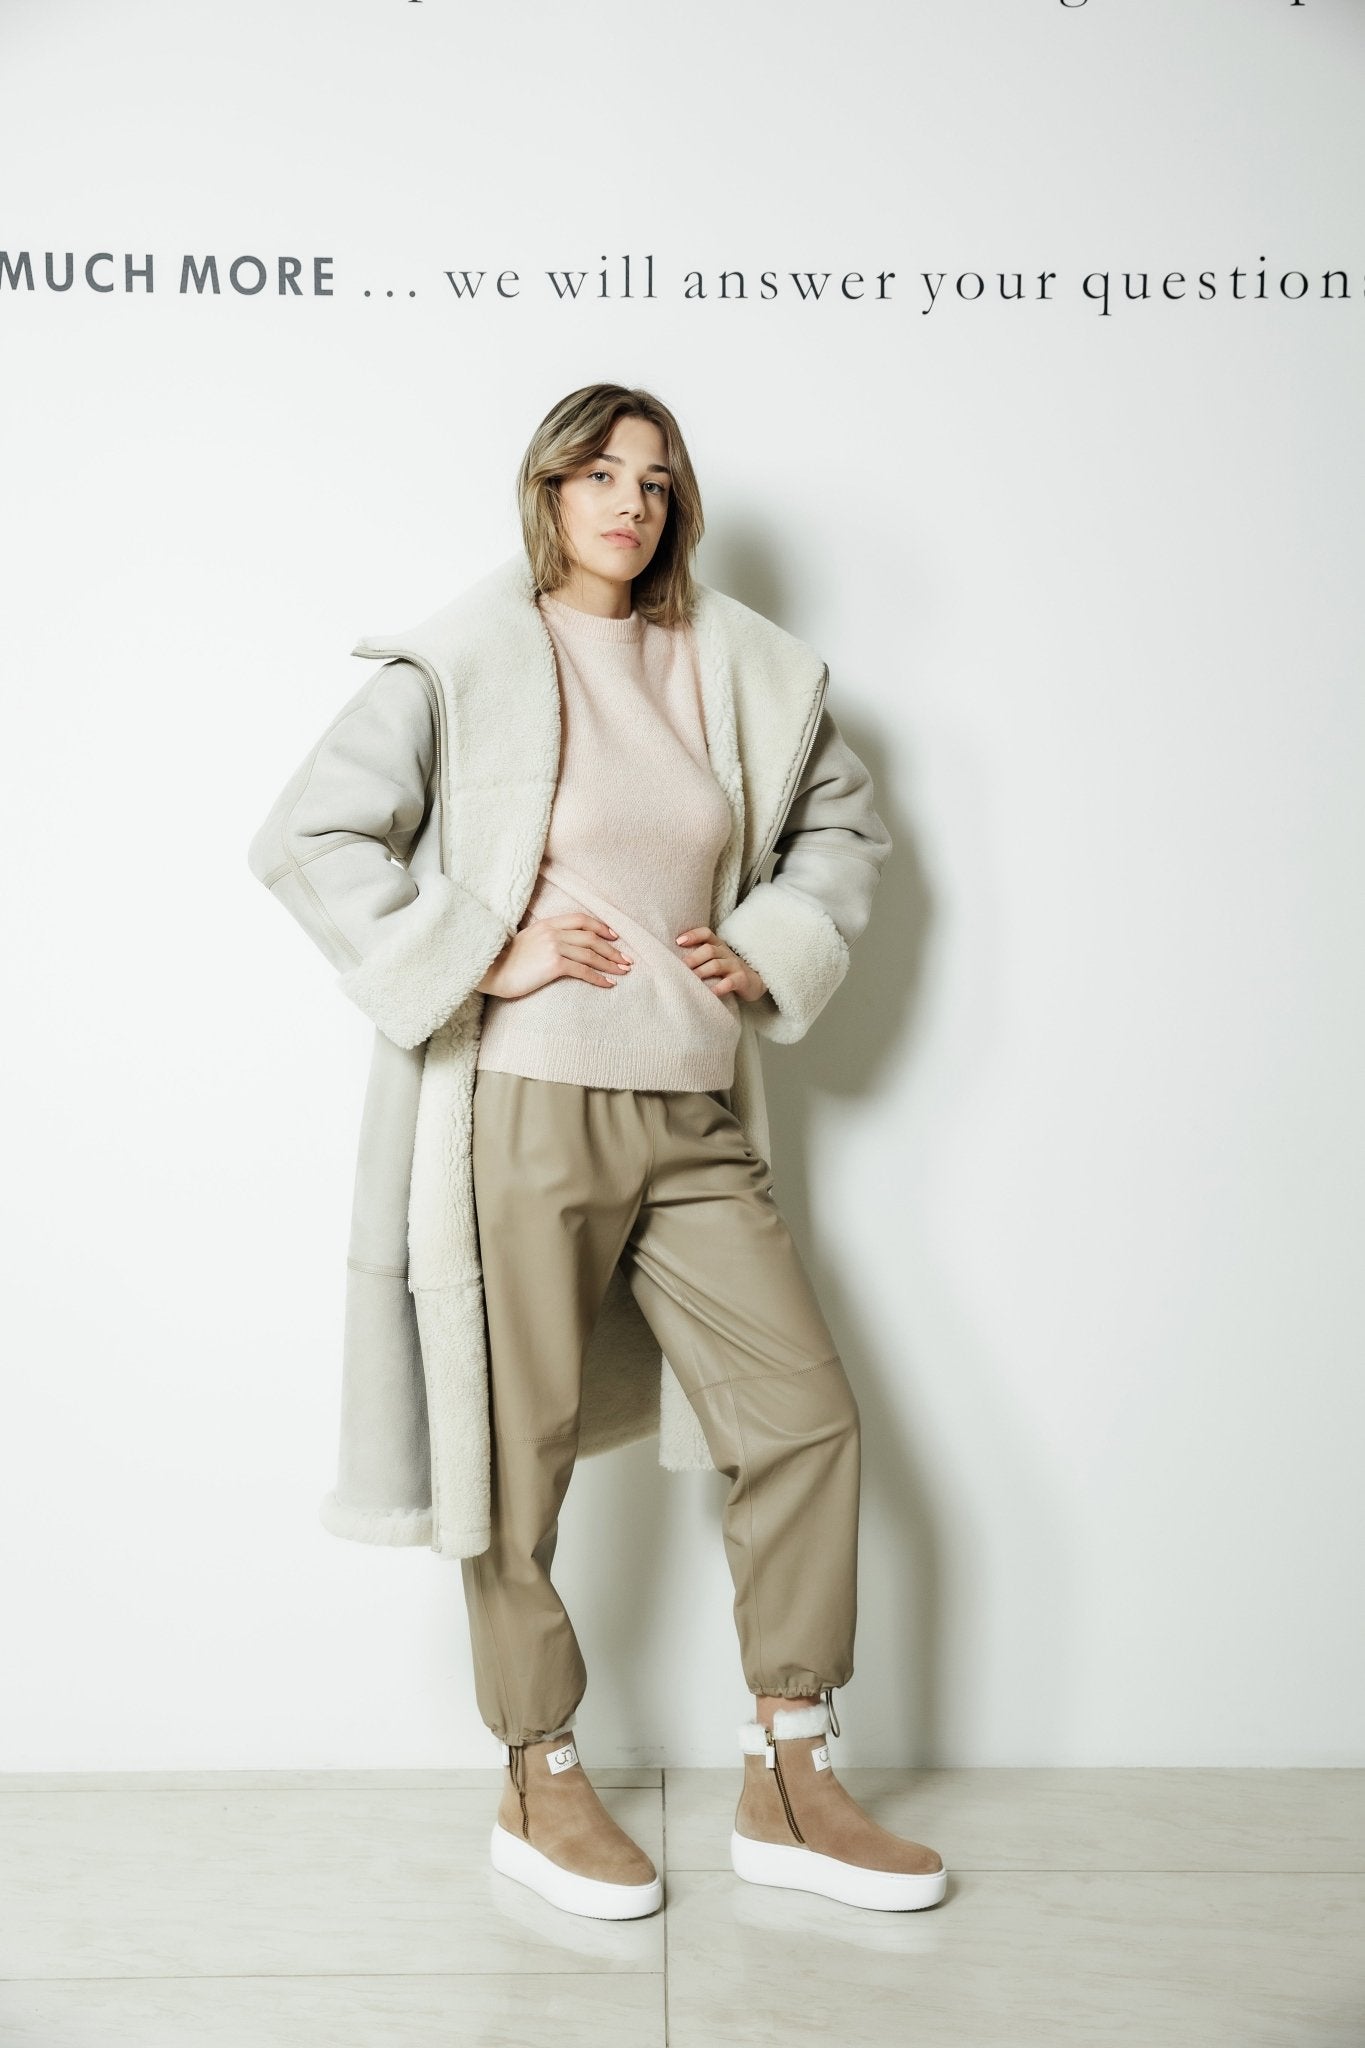 White Signature Shearling Sheepskin Coat by Toteme - The Line